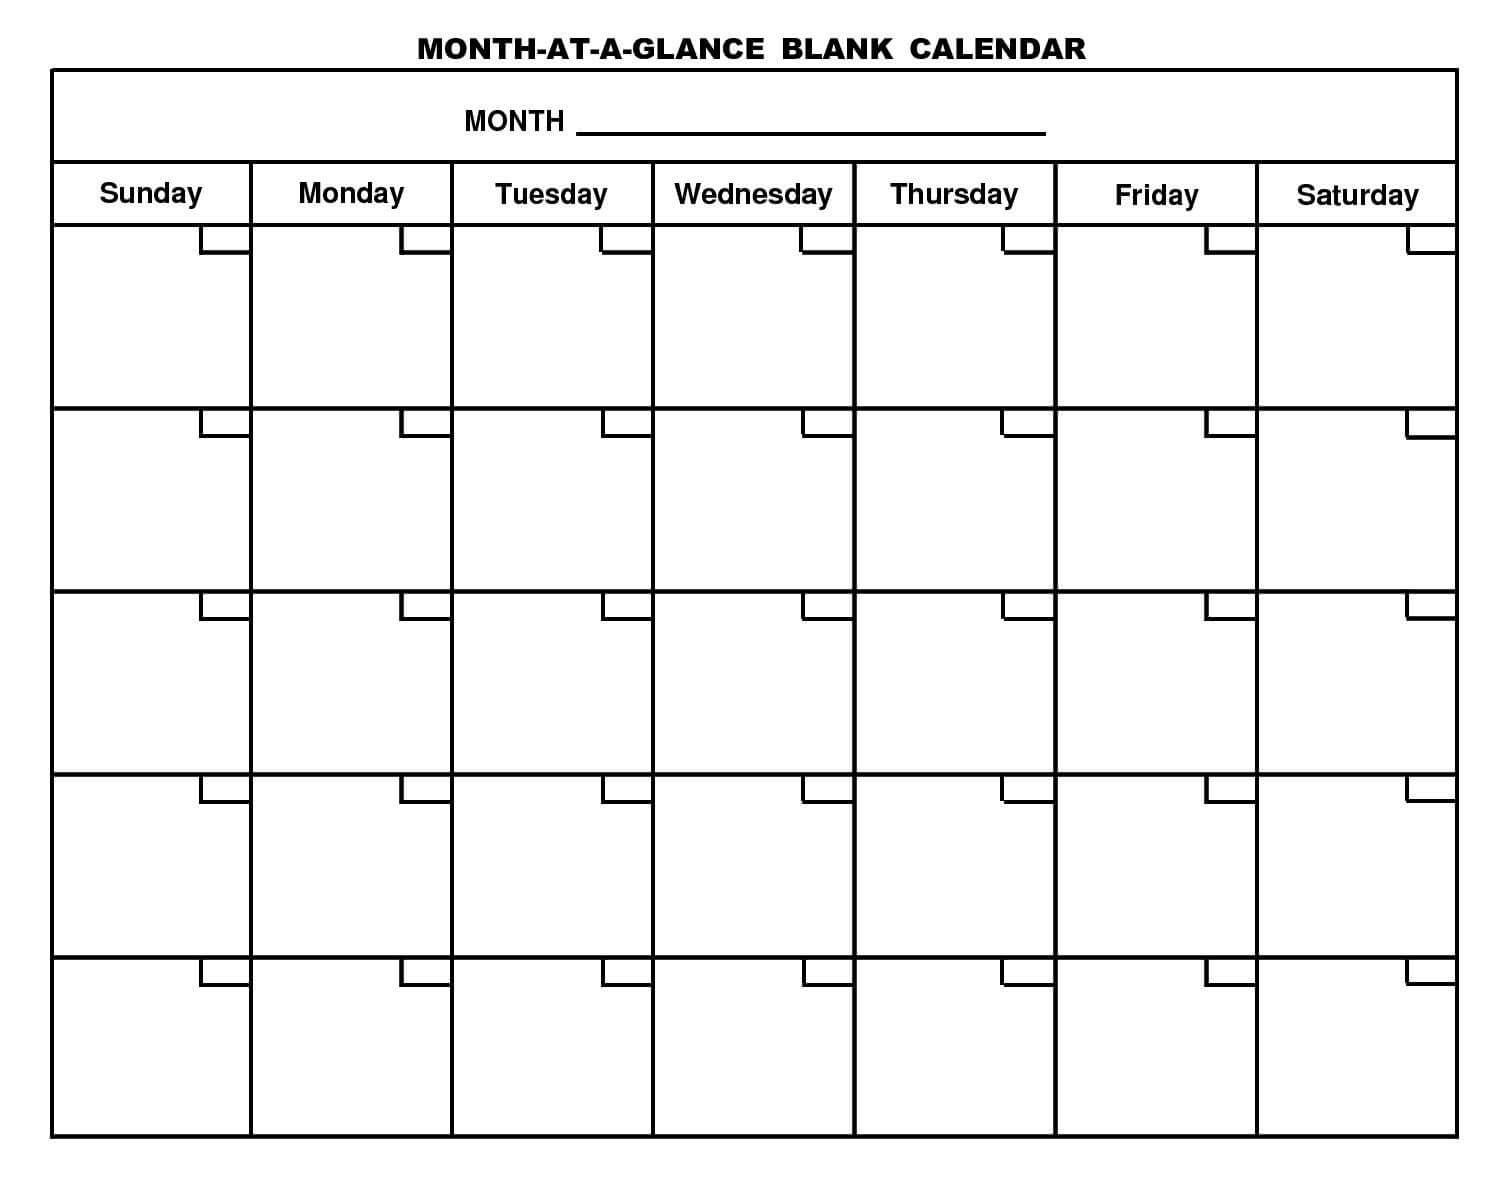 For Month At A Glance Blank Calendar Template – Free With Regard To Month At A Glance Blank Calendar Template